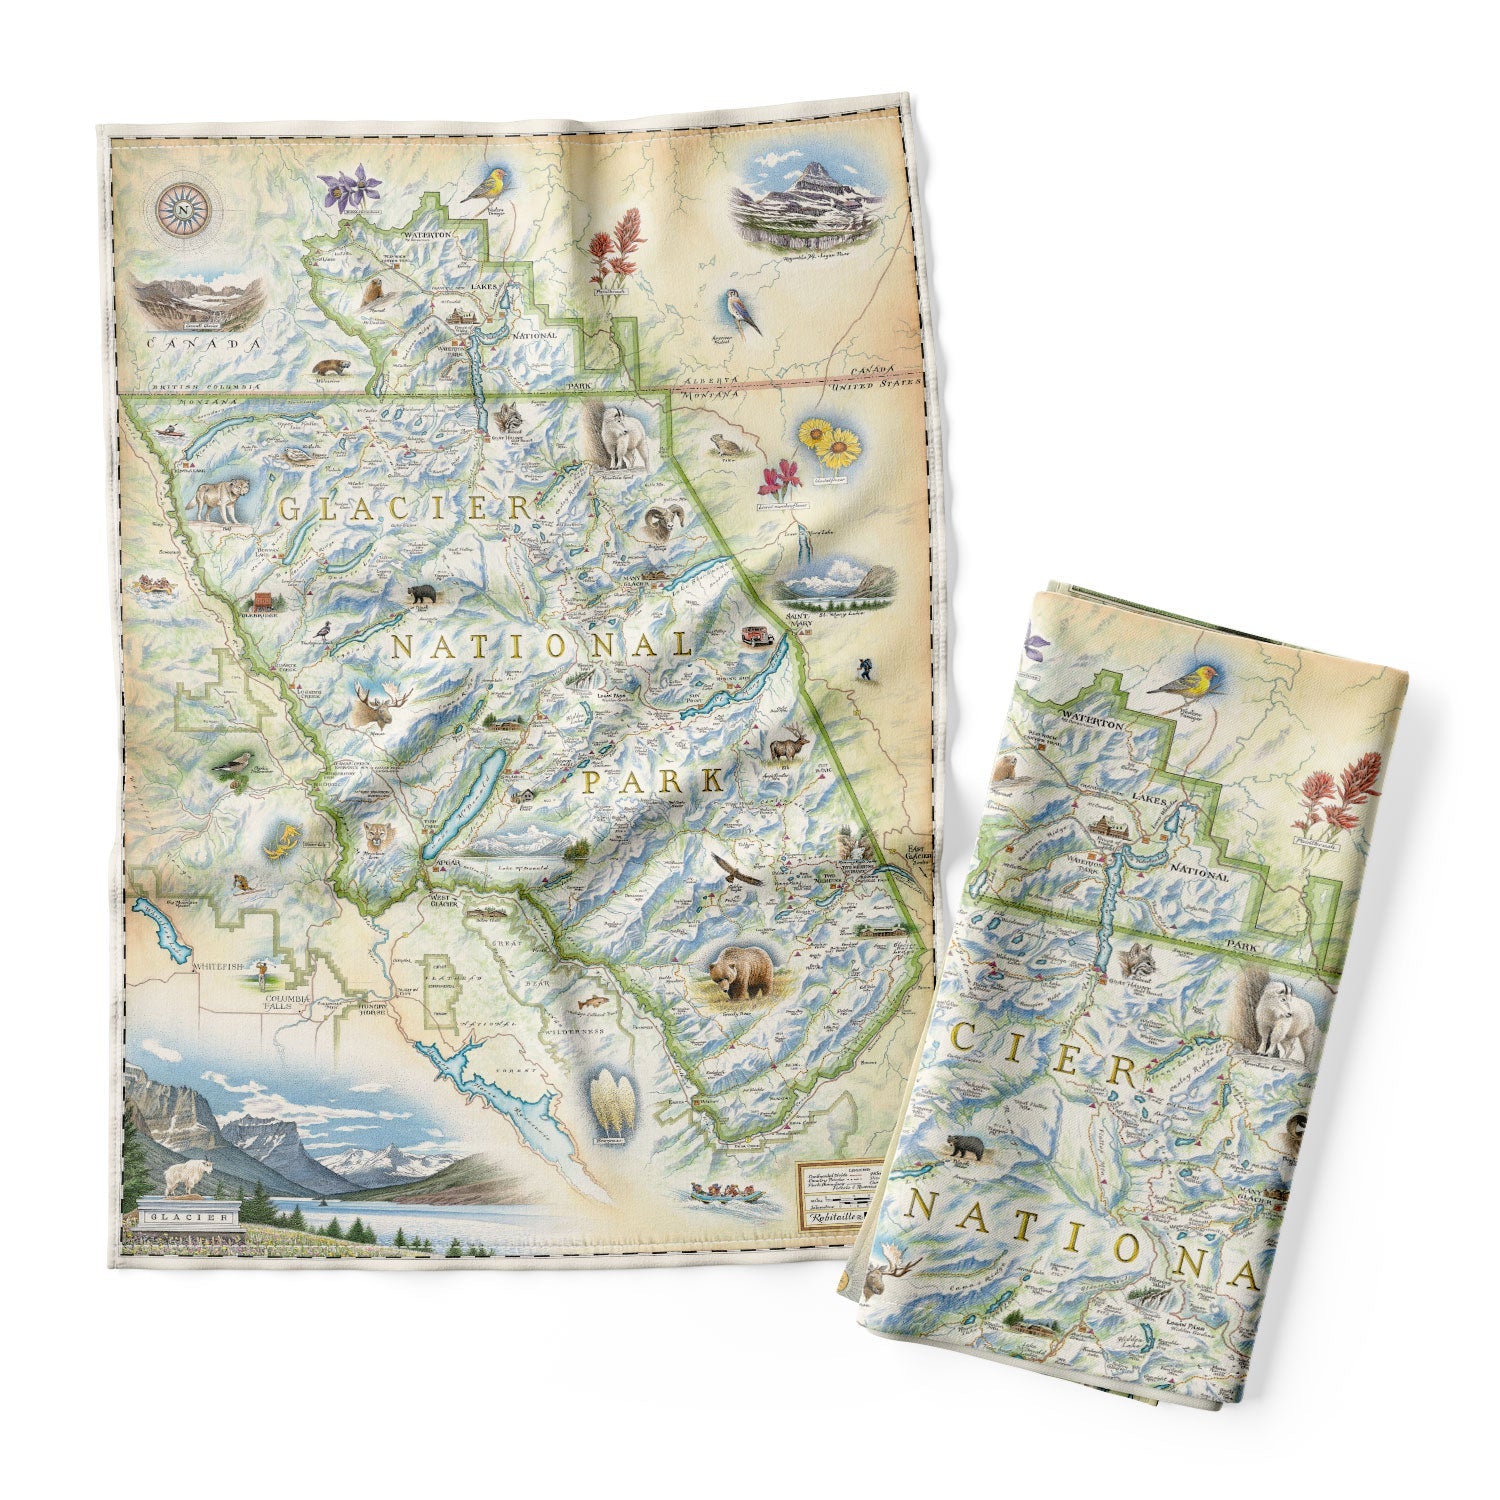 Glacier Kitchen Dishwashing Towel in earth tones of beige and blue. The map features places in the park such as Logan Pass, Lake McDonald Lodge, Many Glacier Lodge, Two Medicine, Glacier Park Lodge, and the Going-to-the-sun road. Flora and fauna include grizzly bear, elk, moose, mountain goat, and mountain lion. 